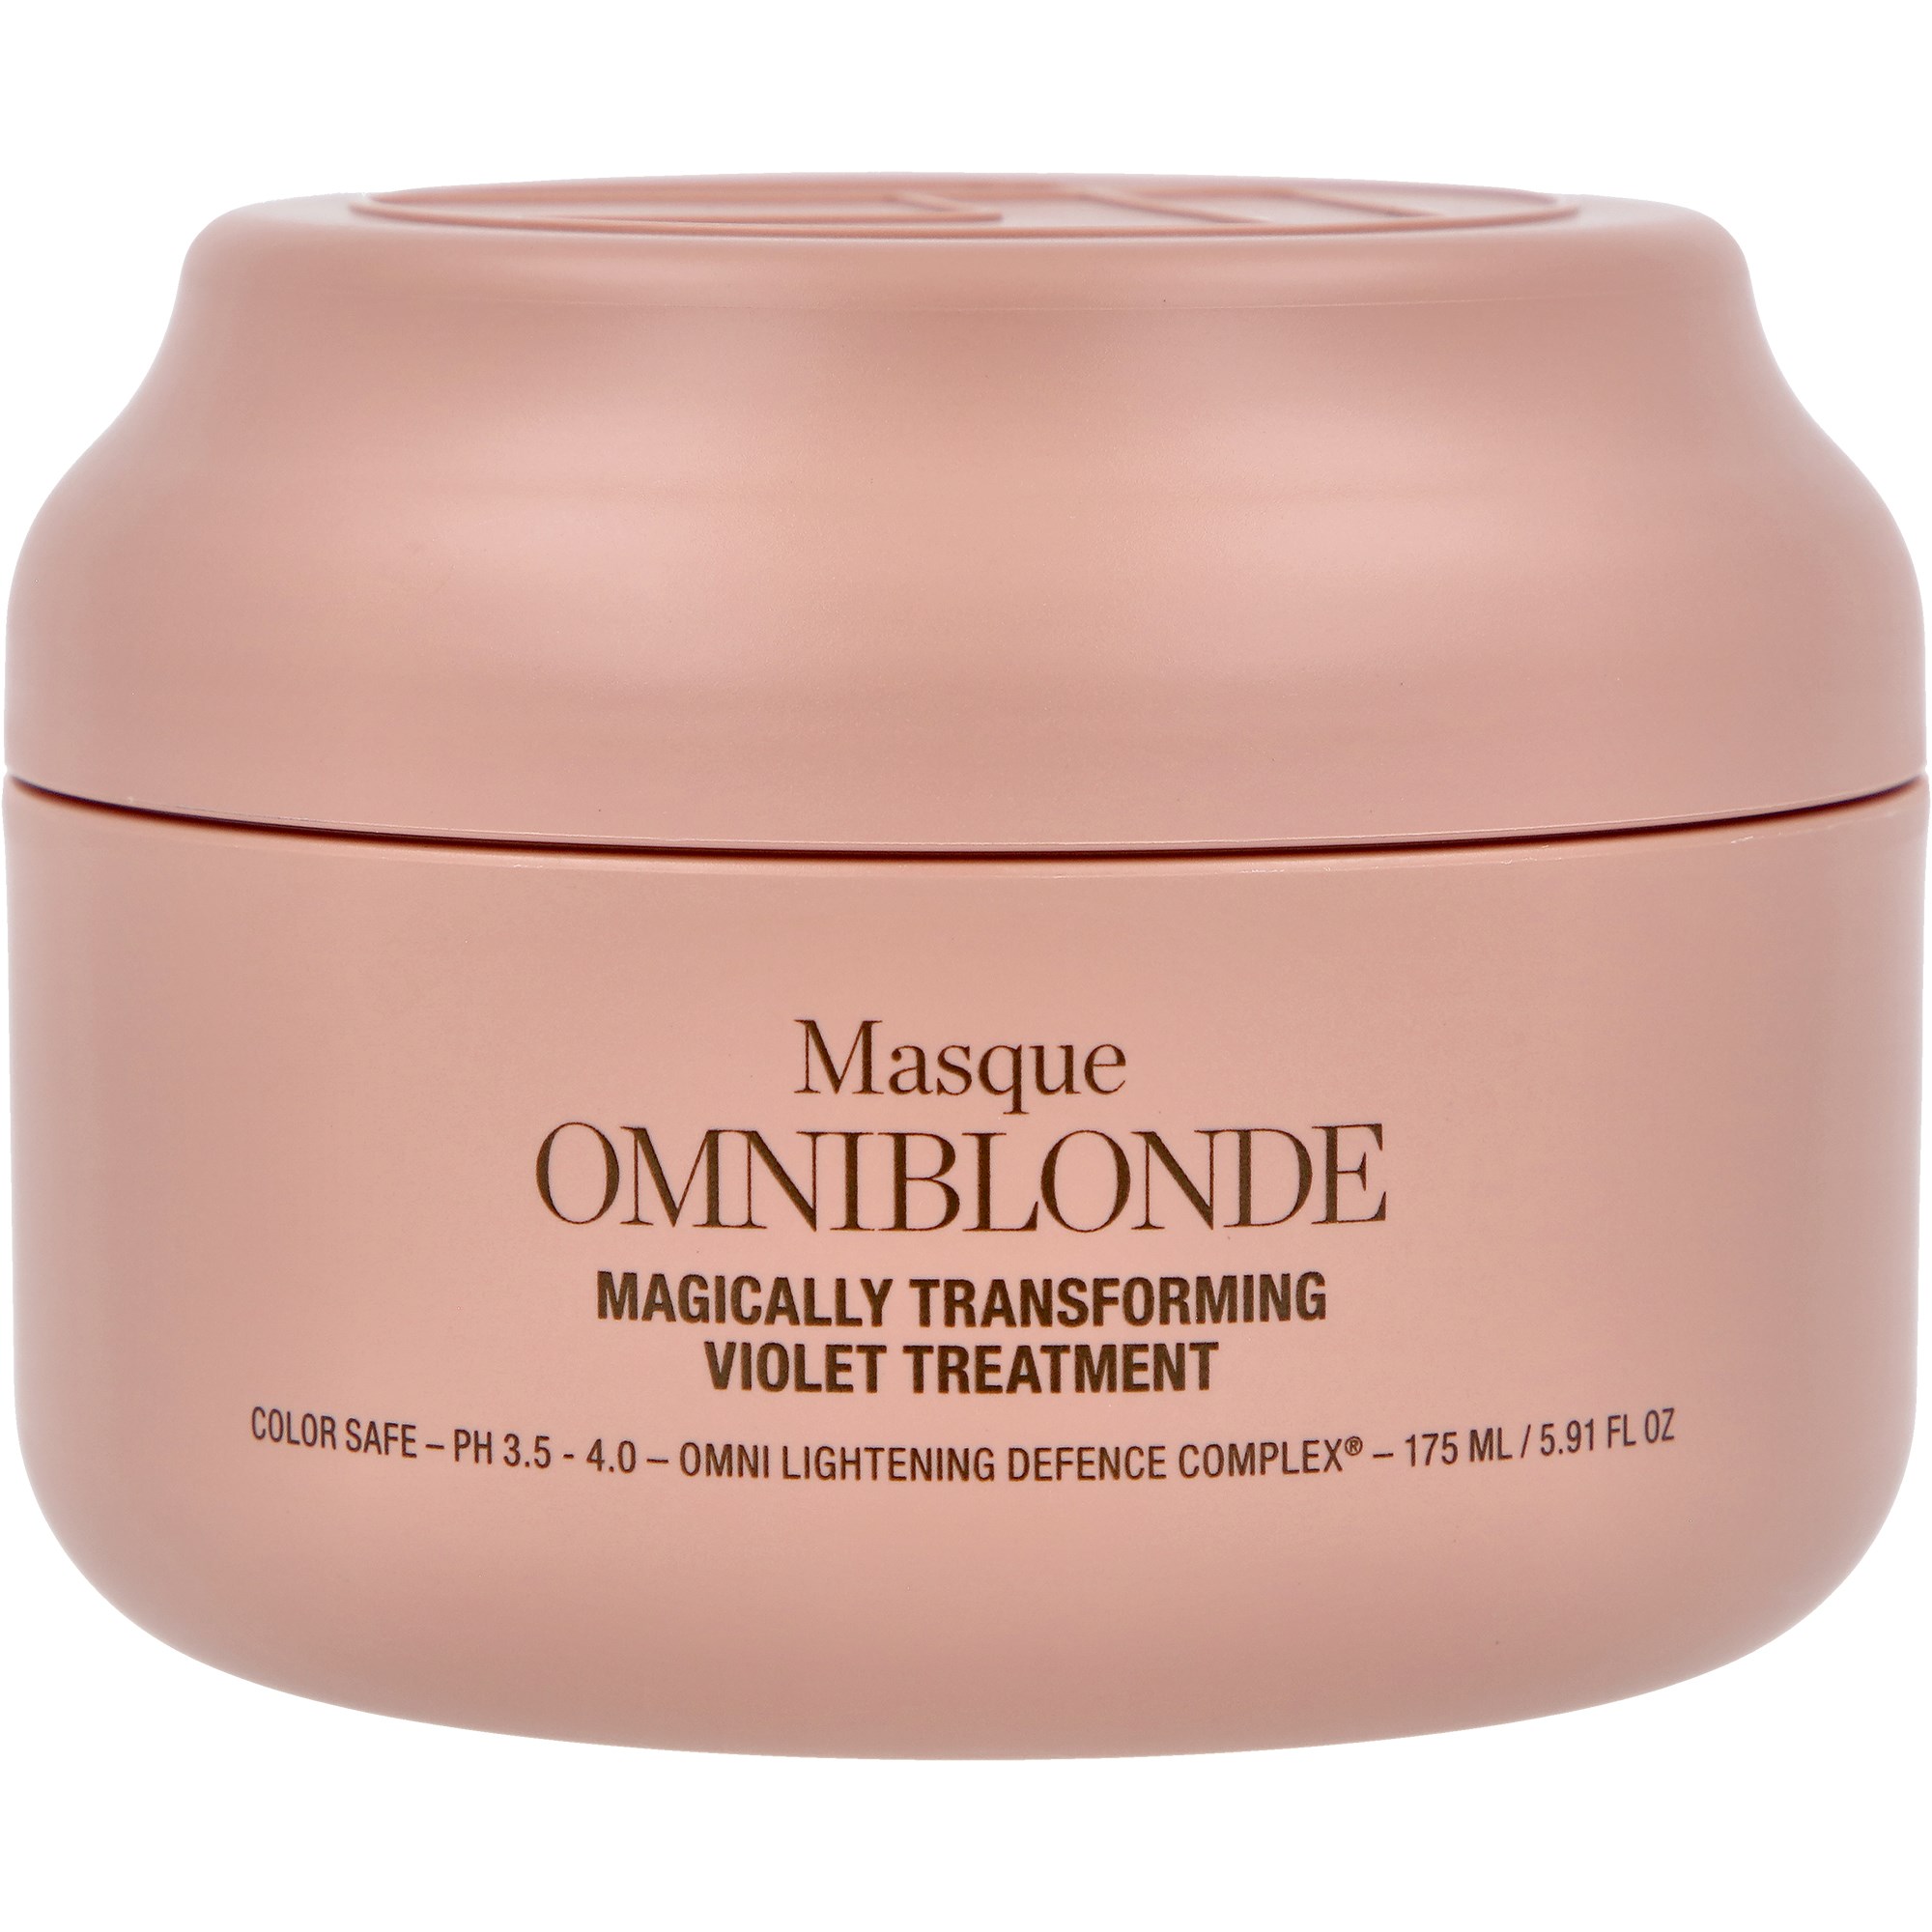 OMNIBLONDE Magically Transforming Violet Treatment 175 ml